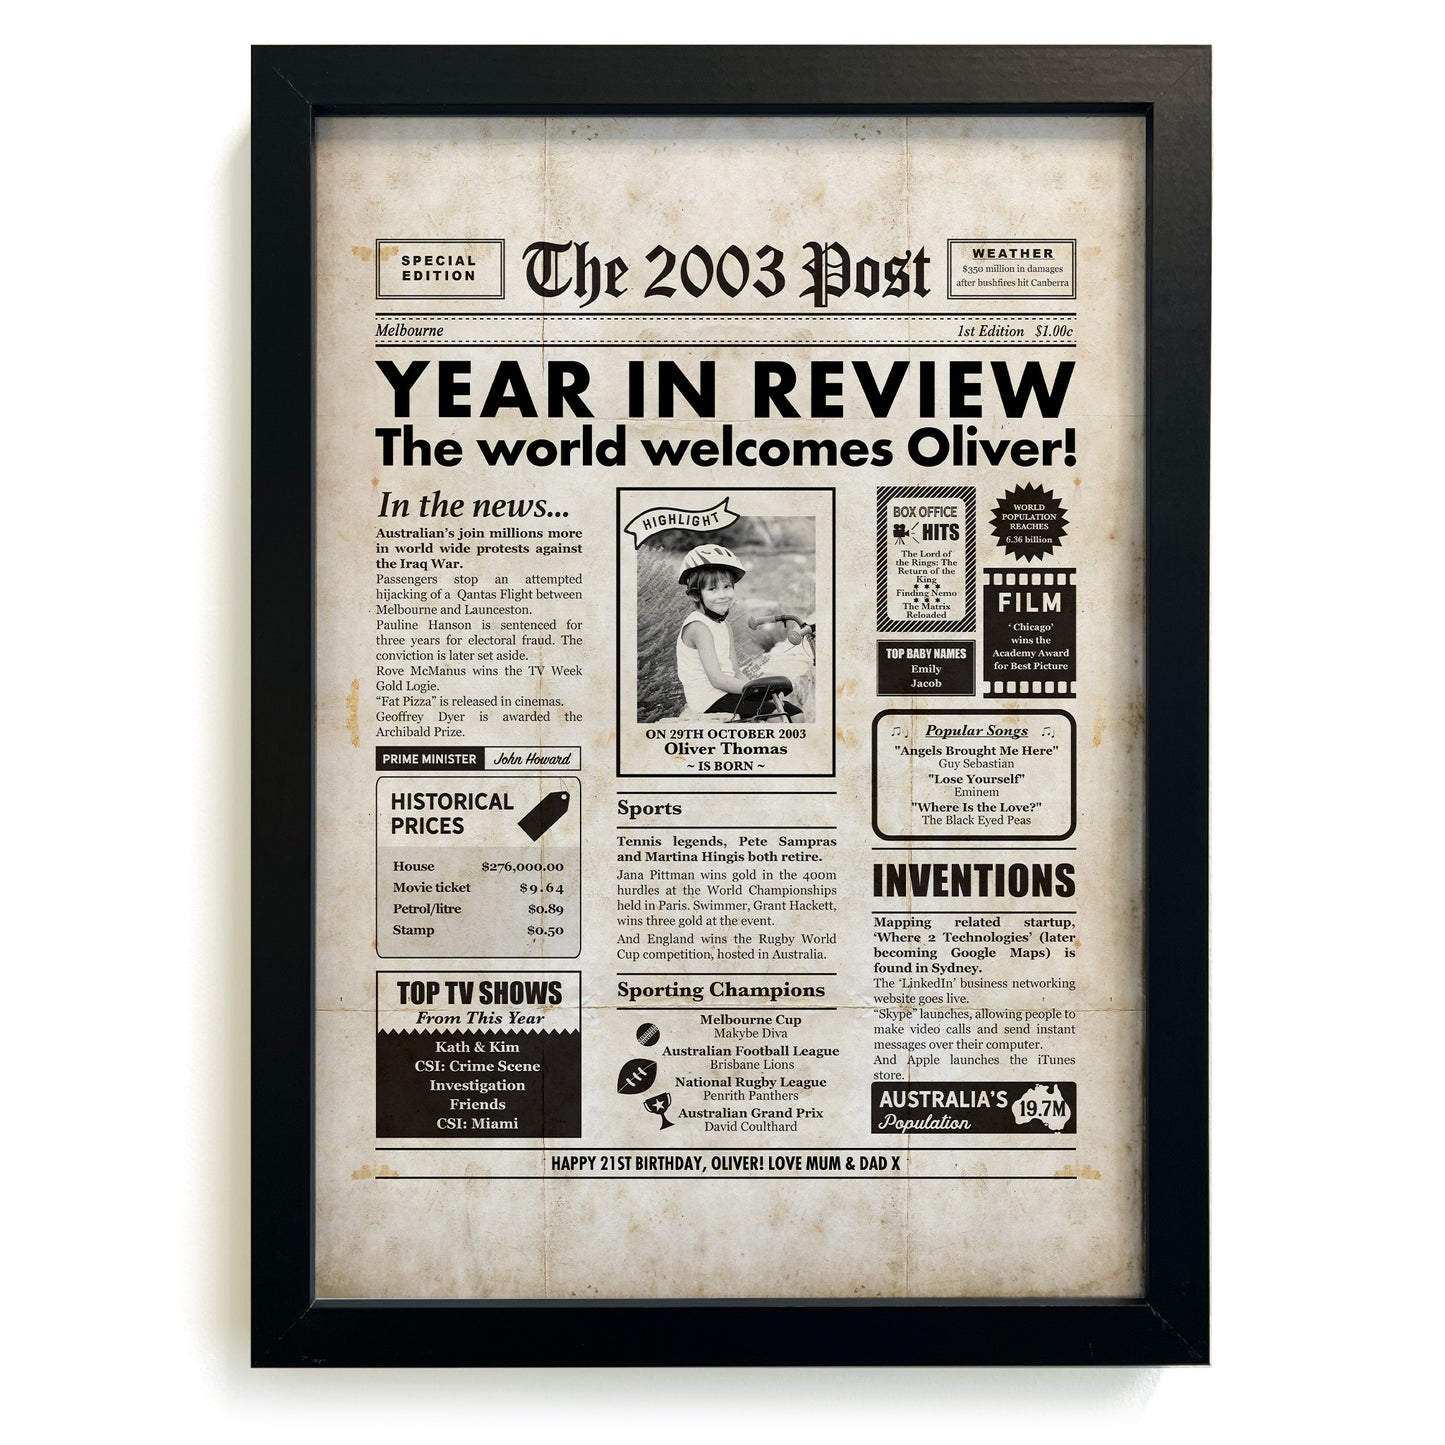 21st Australian Birthday Newspaper featuring image of a kid in a black frame